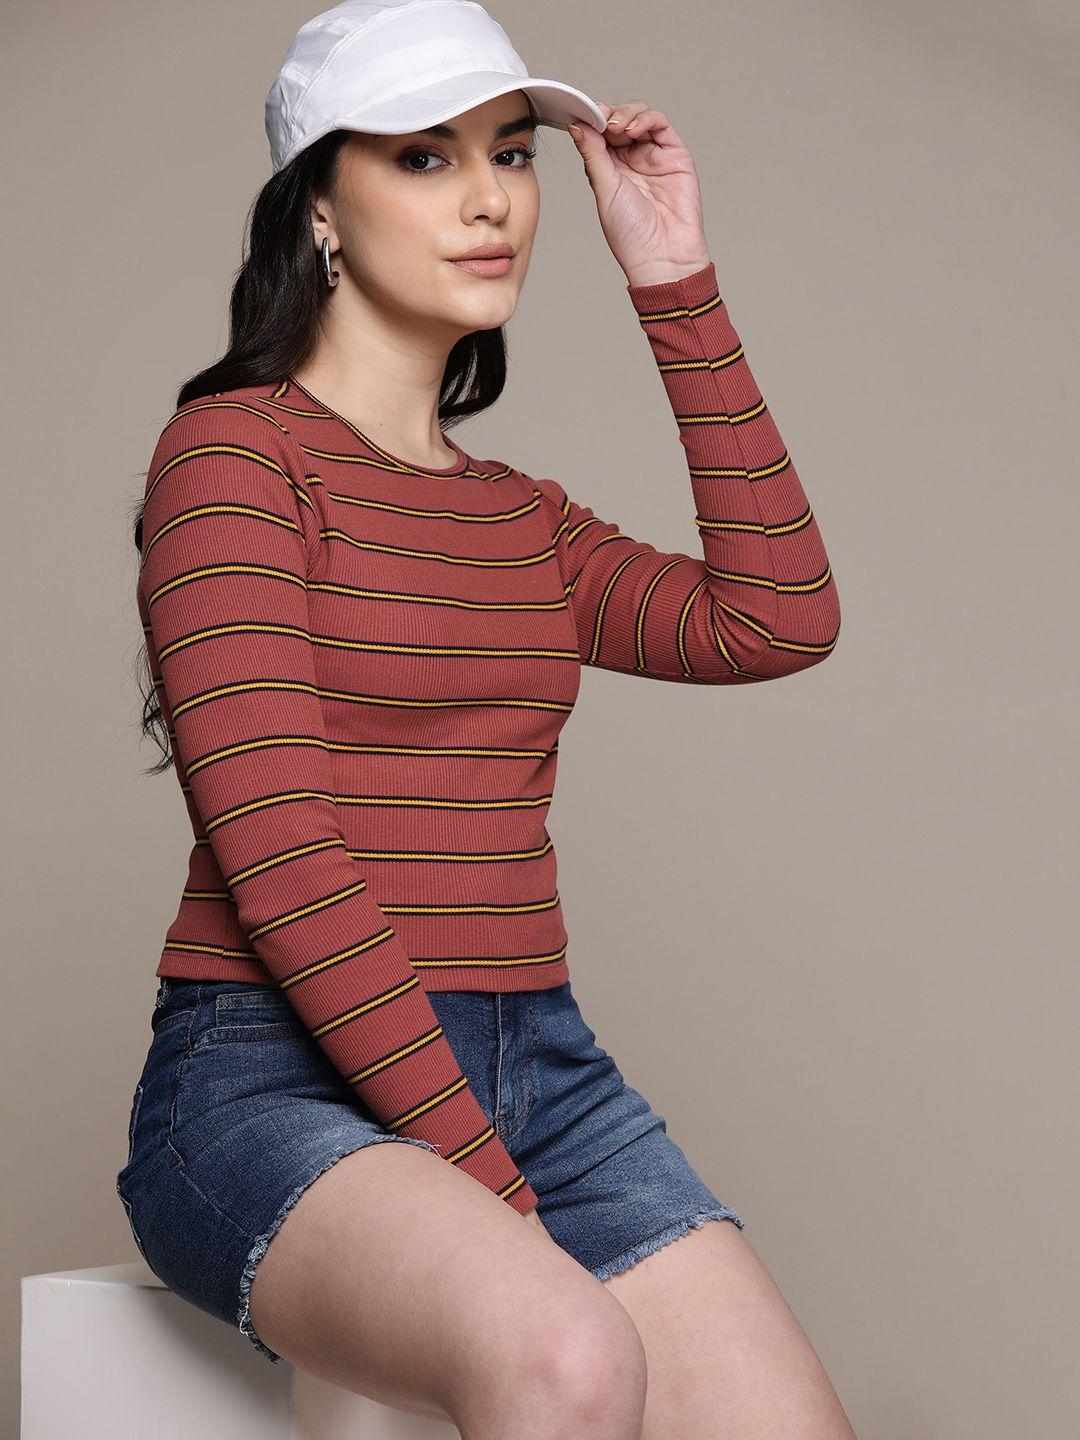 the roadster lifestyle co. striped long sleeve knit top